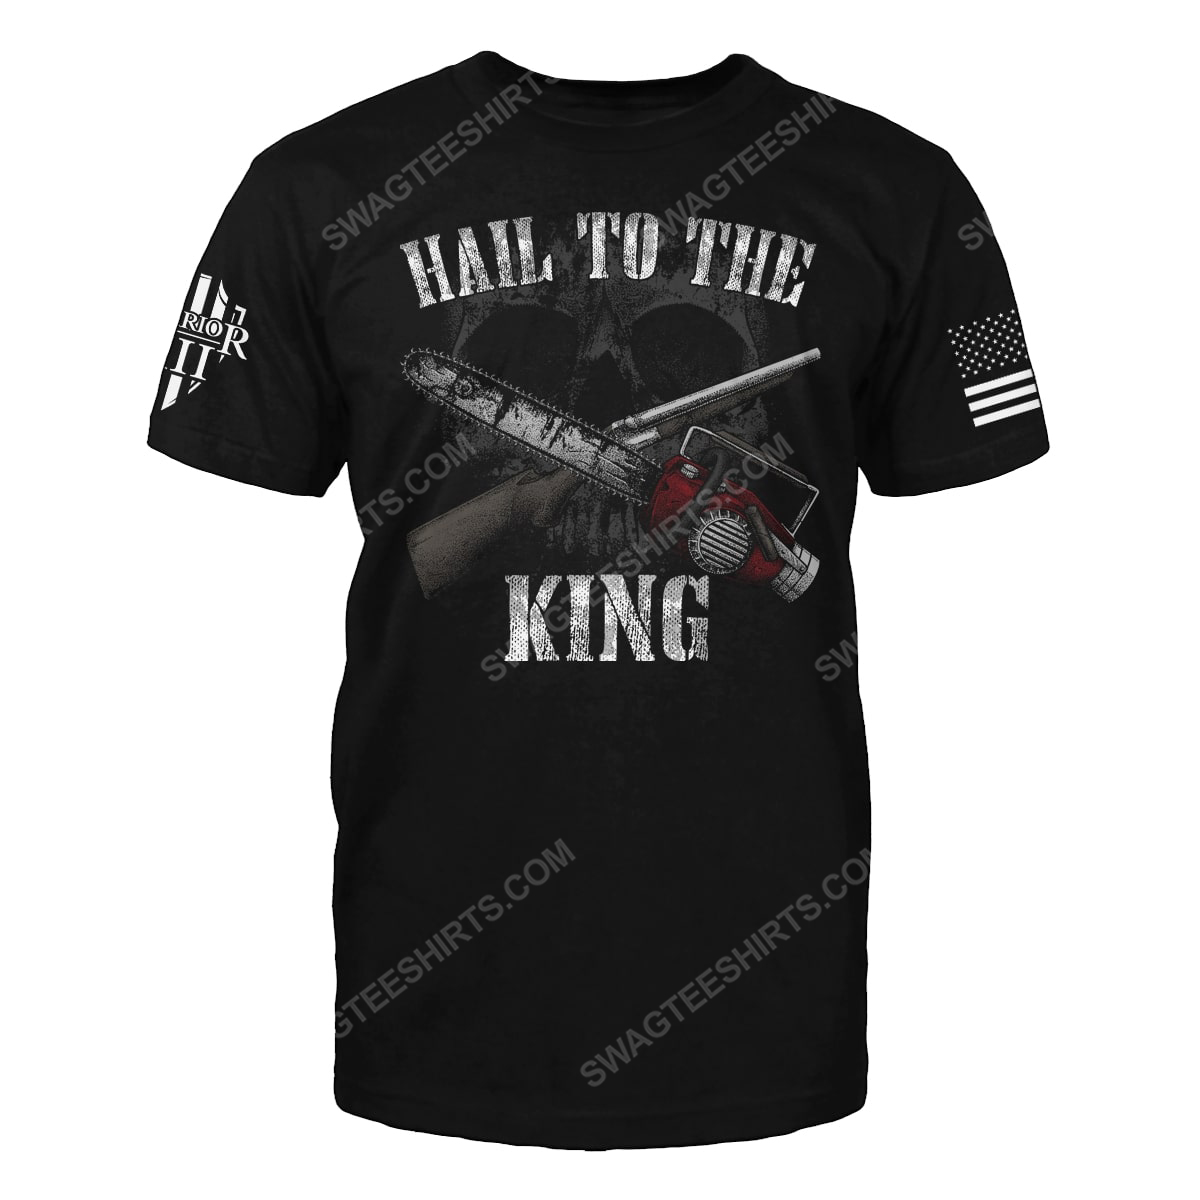 Hail to the king skull and saw shirt 2(1)